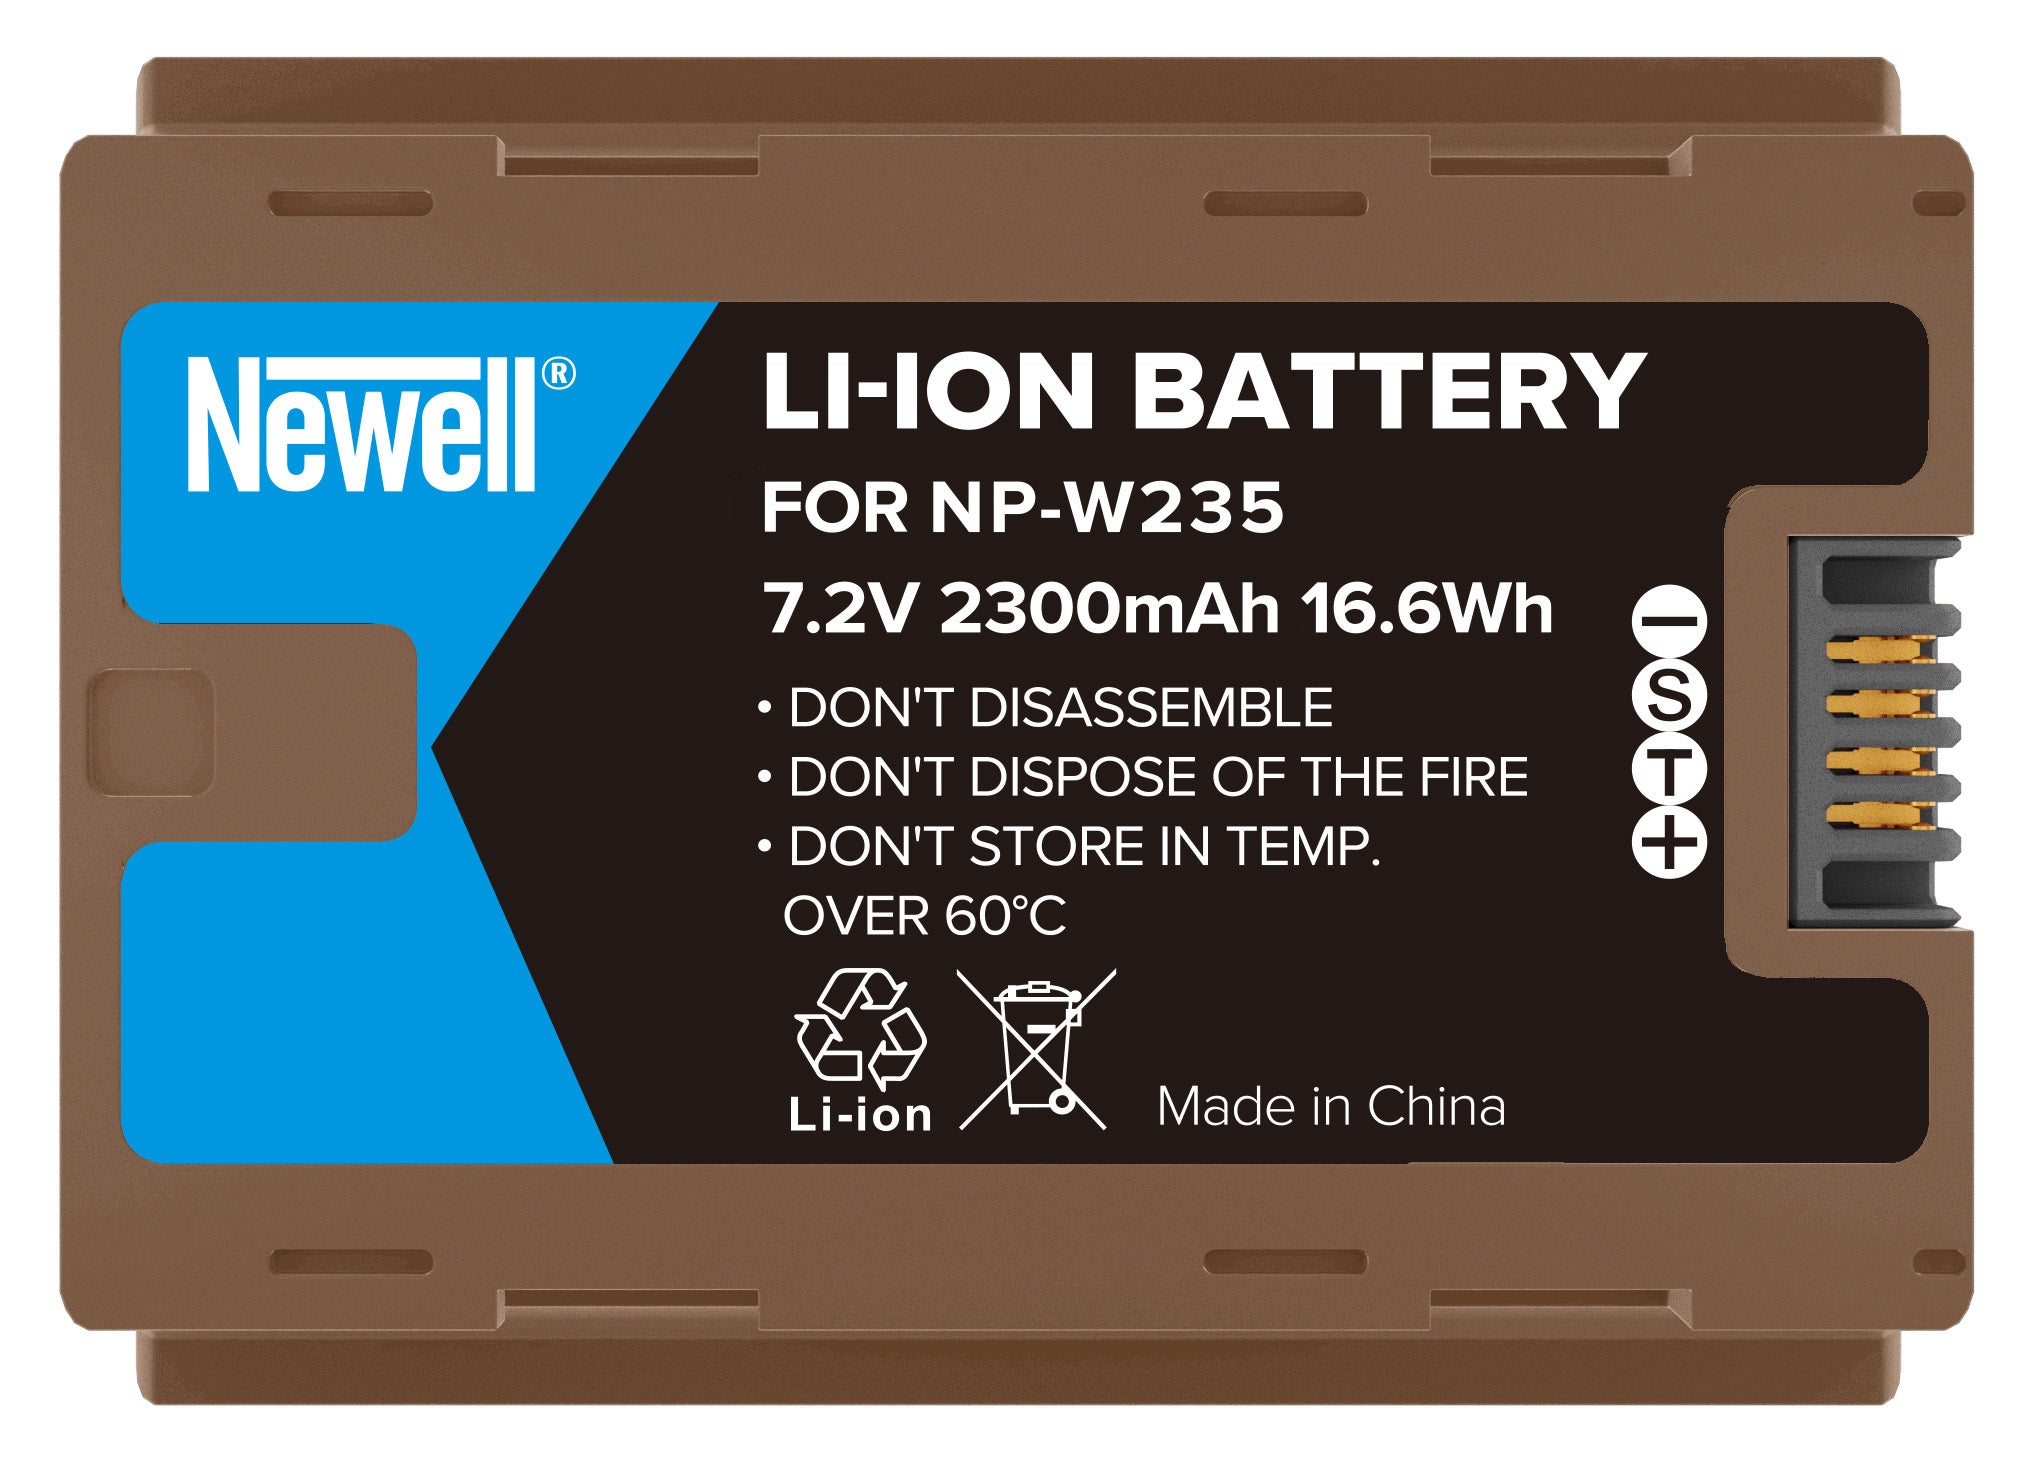 Newell Battery Fujifilm NP-W235 with USB-C onboard recharge (2300mAh)